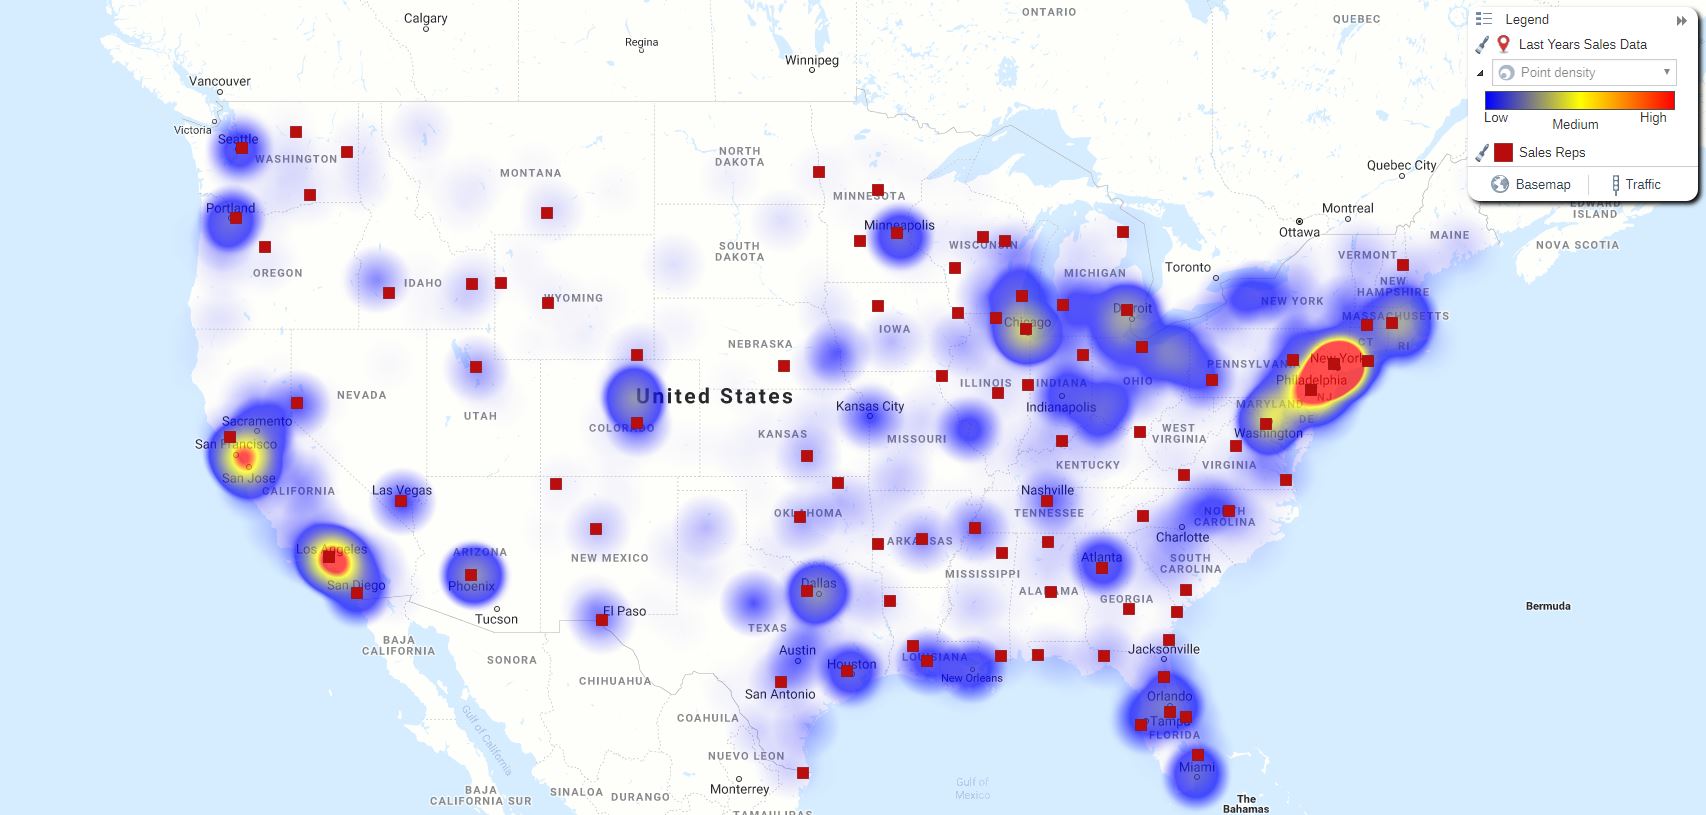 Hot spot heat map of sales volume overlaid with sales reps